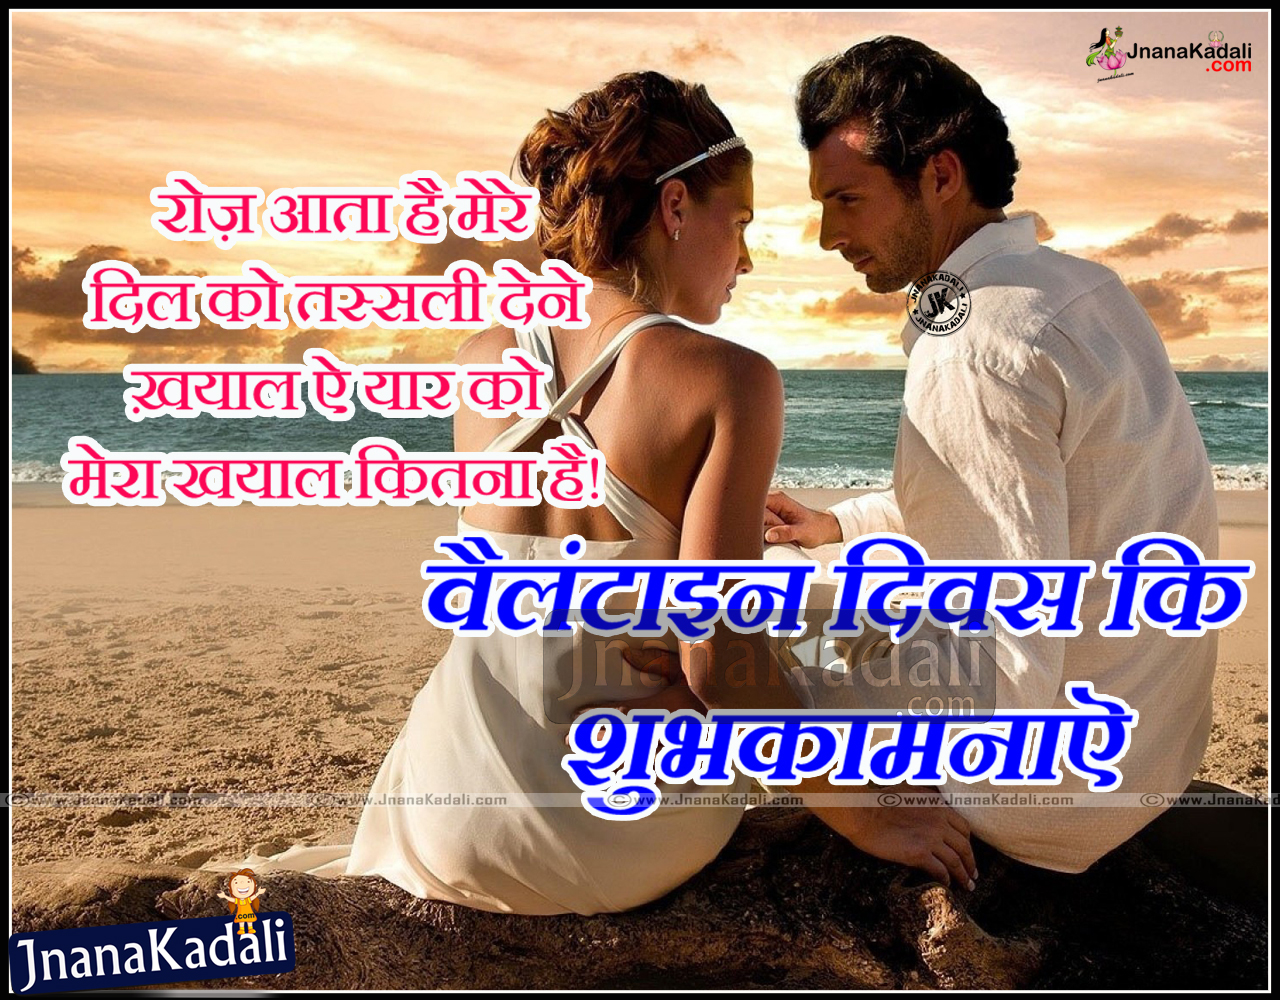 Heart Touching Love Shayari hd wallpapers in Hindi for Valentines Day